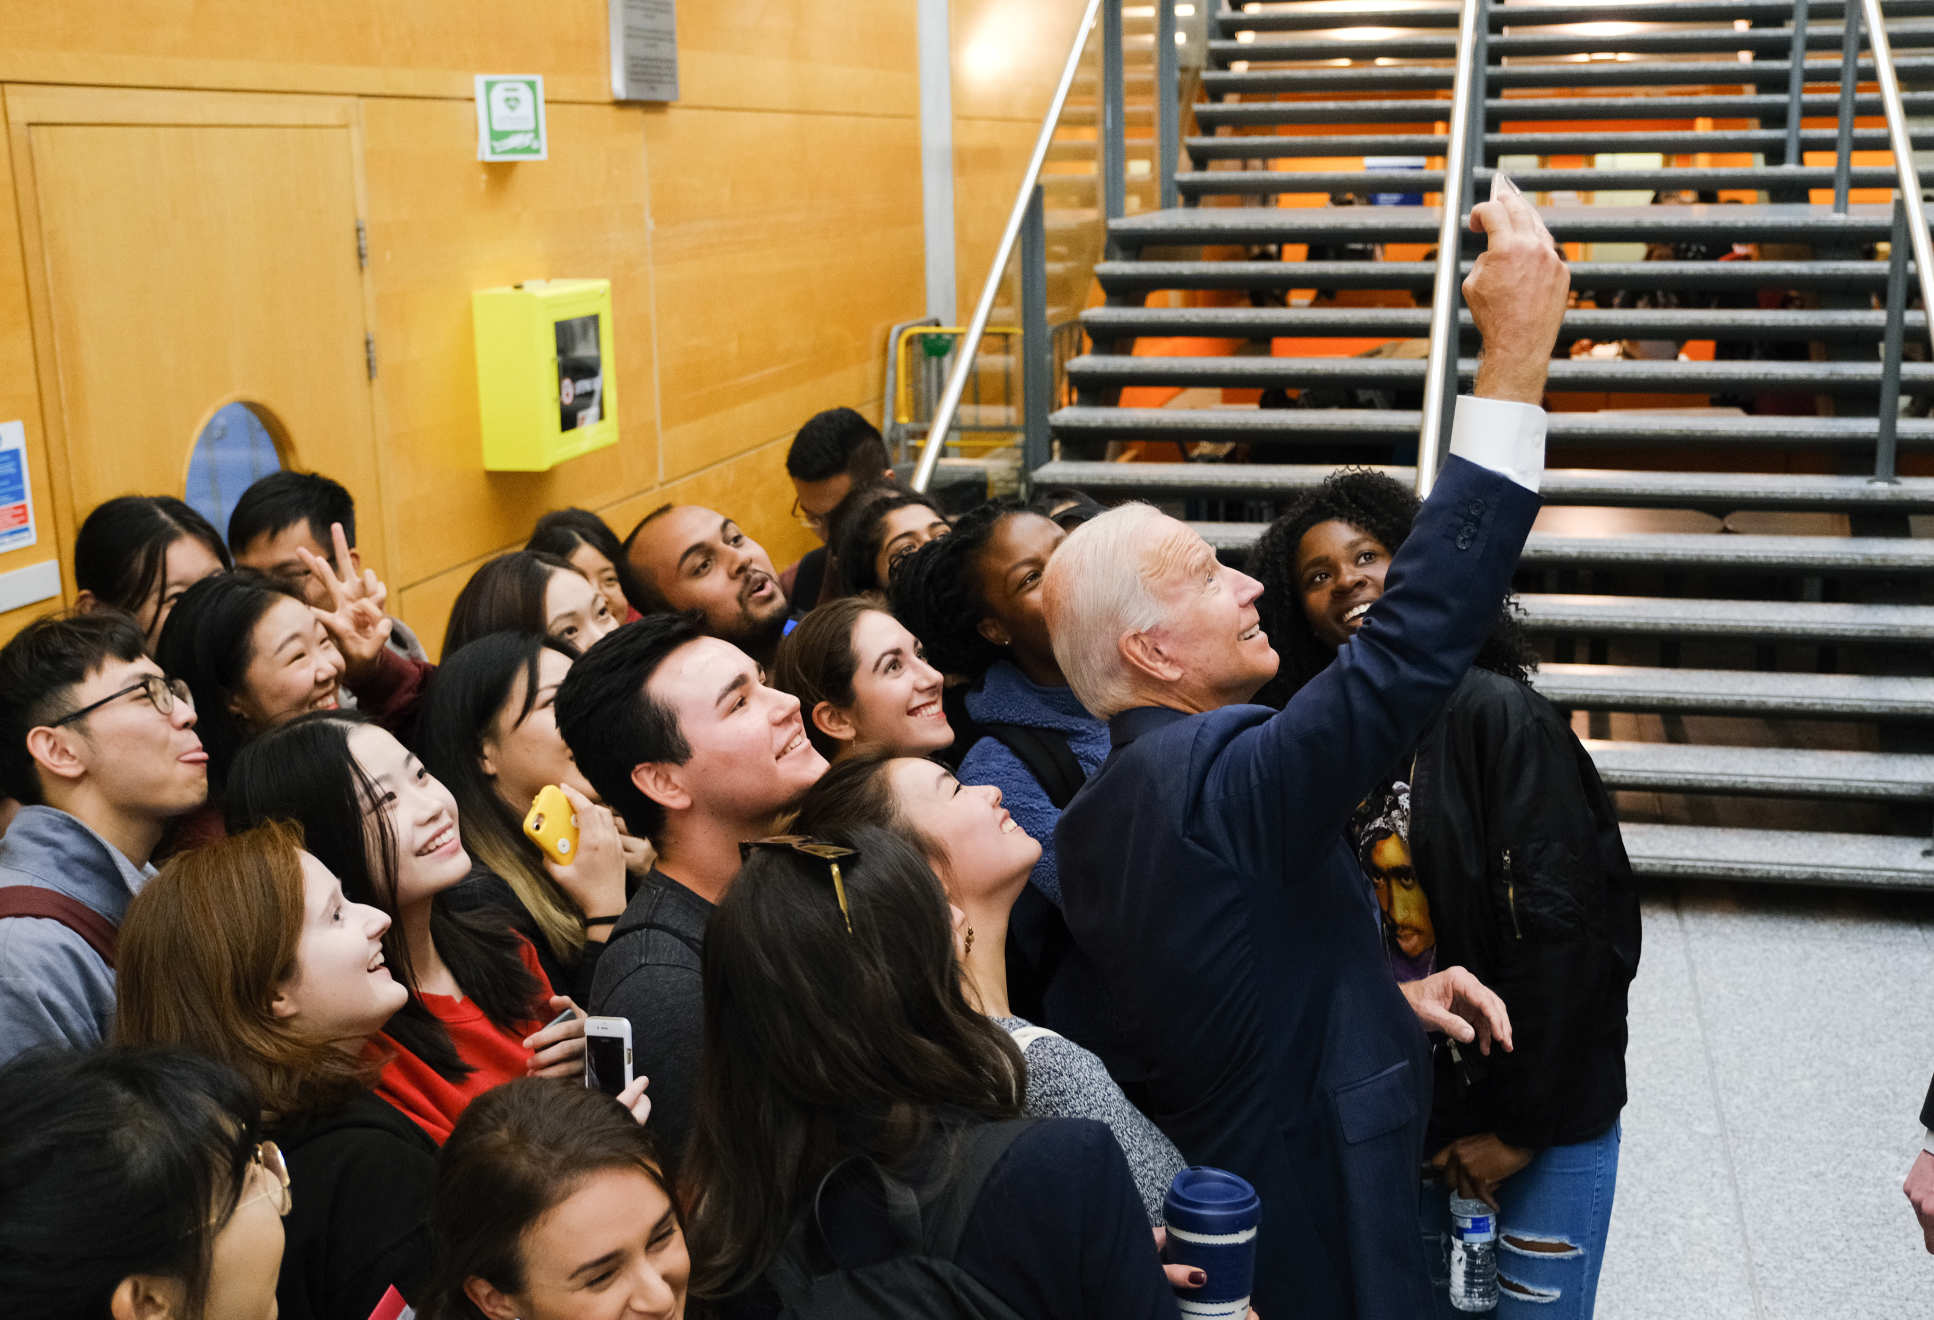 Vice President Biden stopped to pose for a selfie with Imperial students